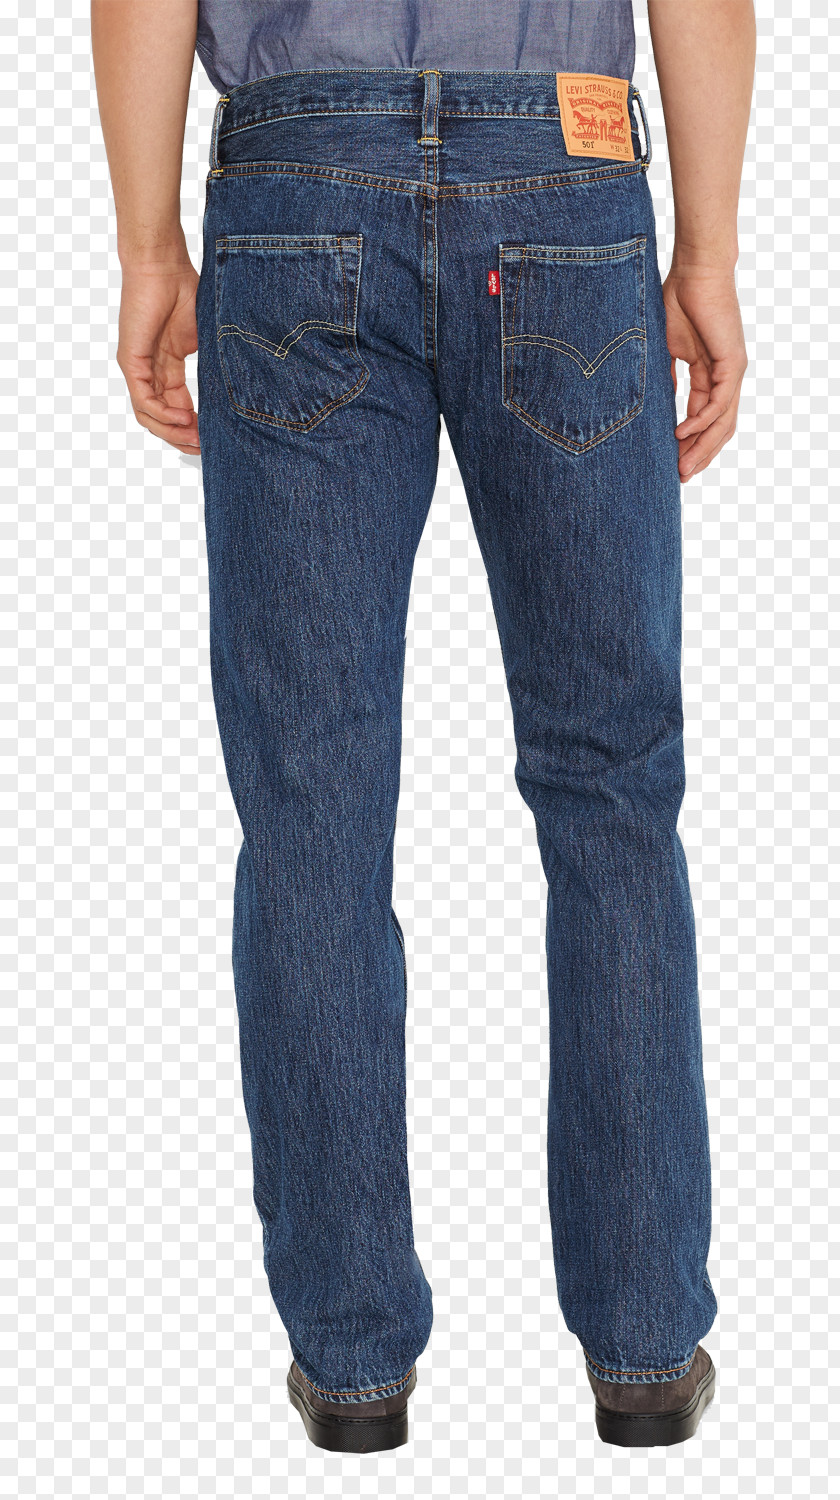 Denim Levis Levi Strauss & Co. Jeans Boot Slim-fit Pants Clothing PNG